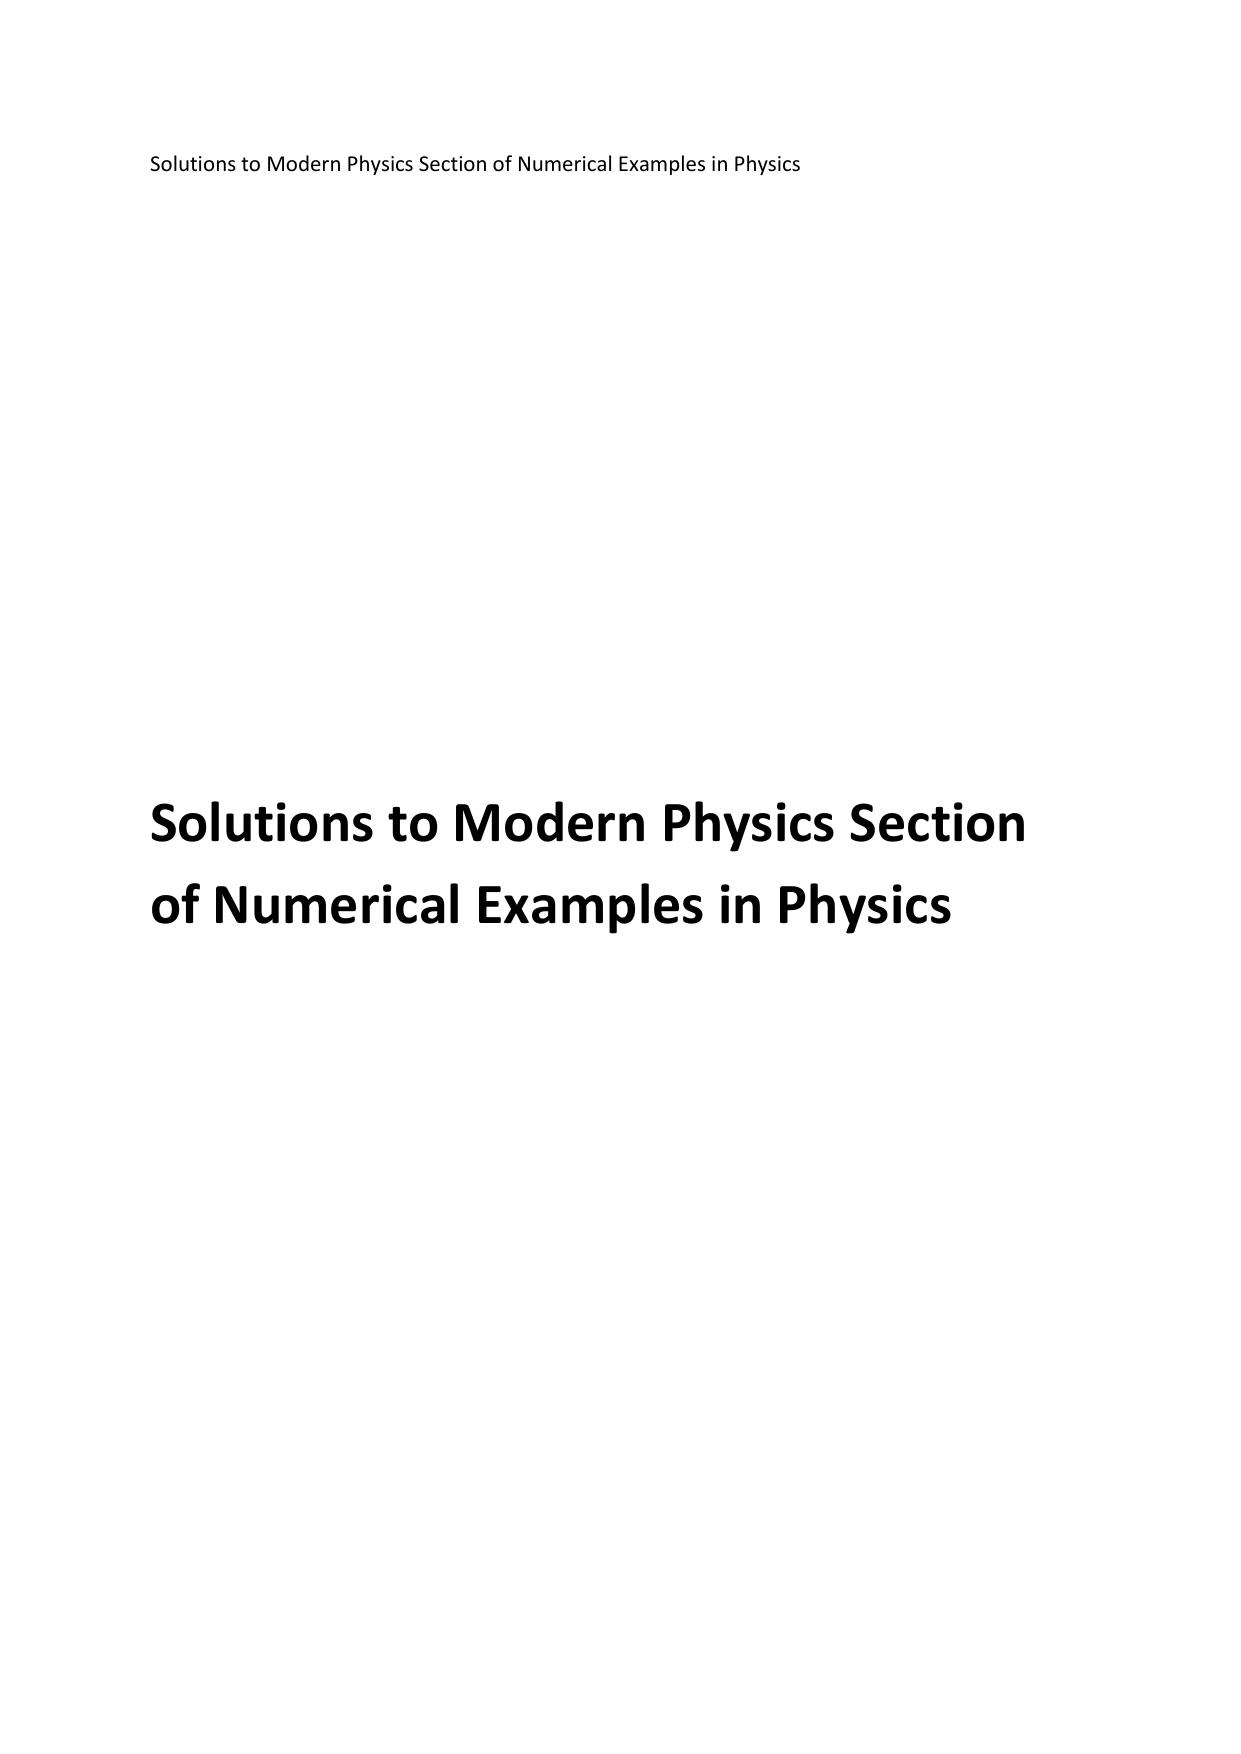 N N Ghosh Modern Physics Solutions to Numerical ( PDFDrive.com )